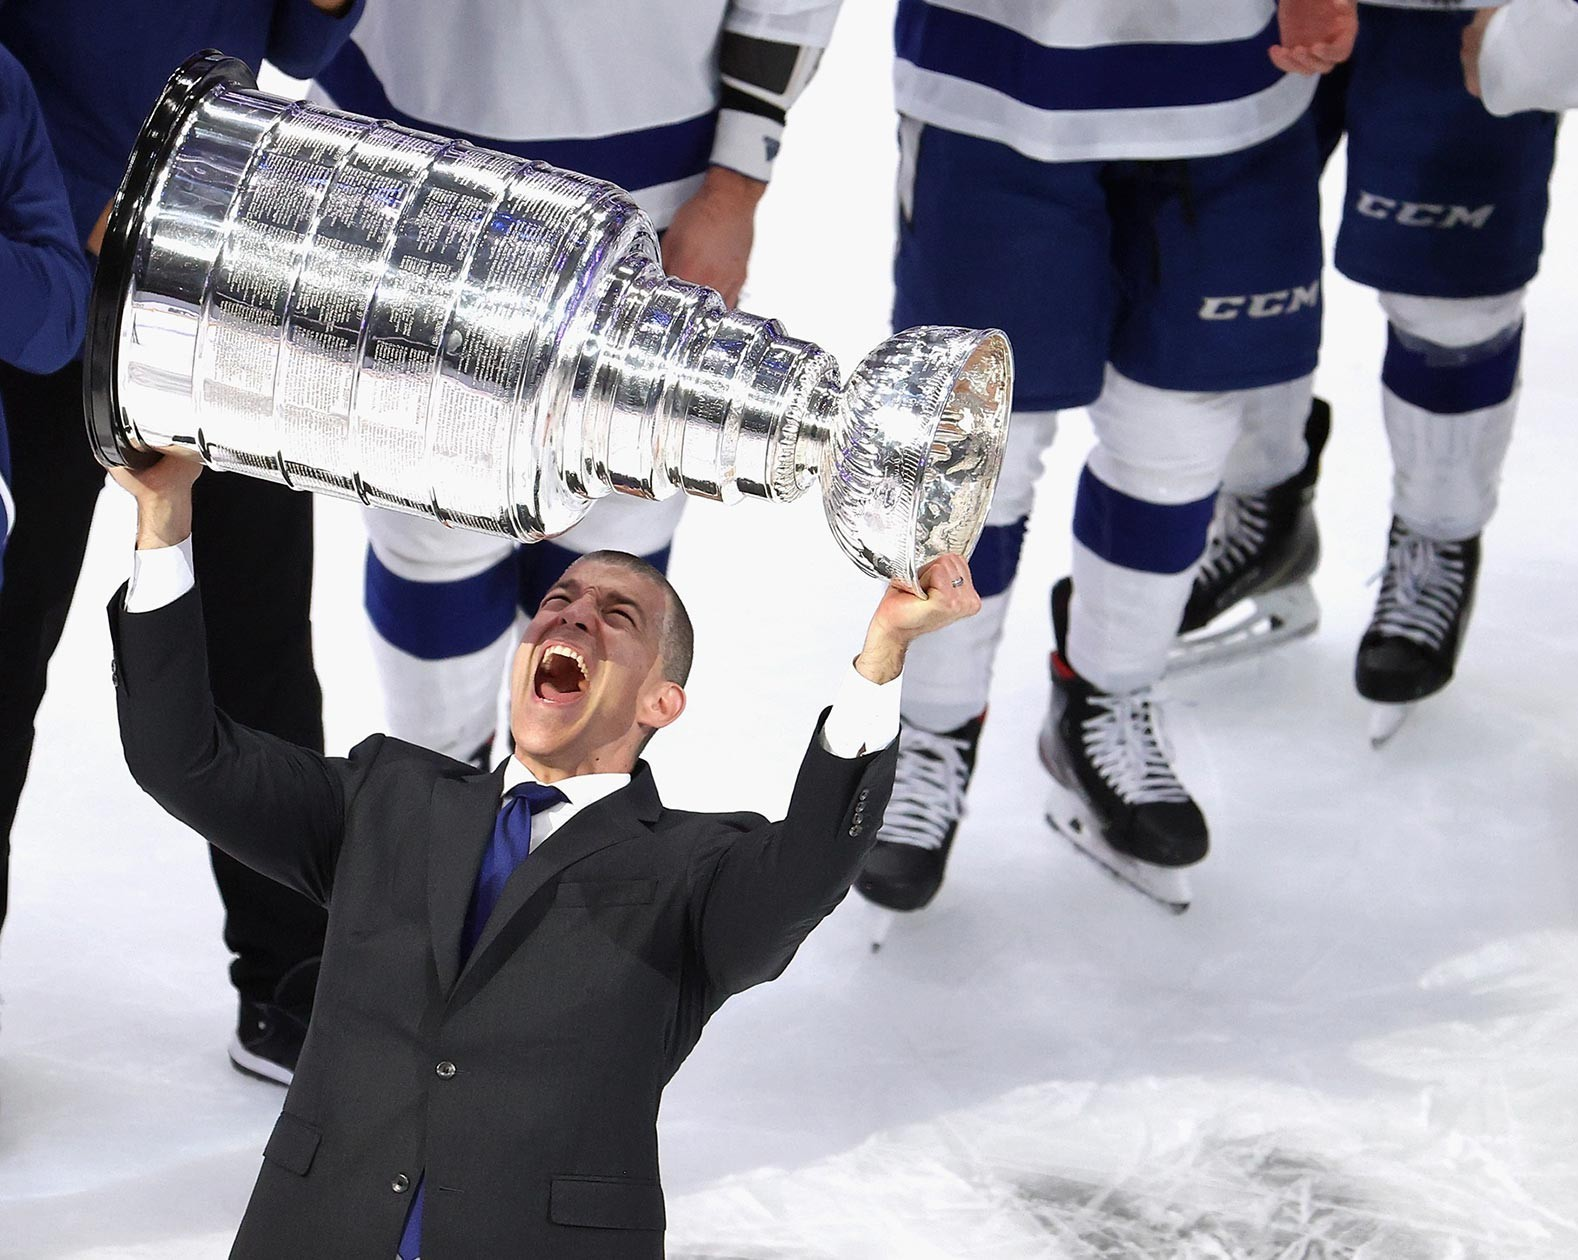 Concordia business grad leads Tampa Bay Lightning to Stanley Cup win